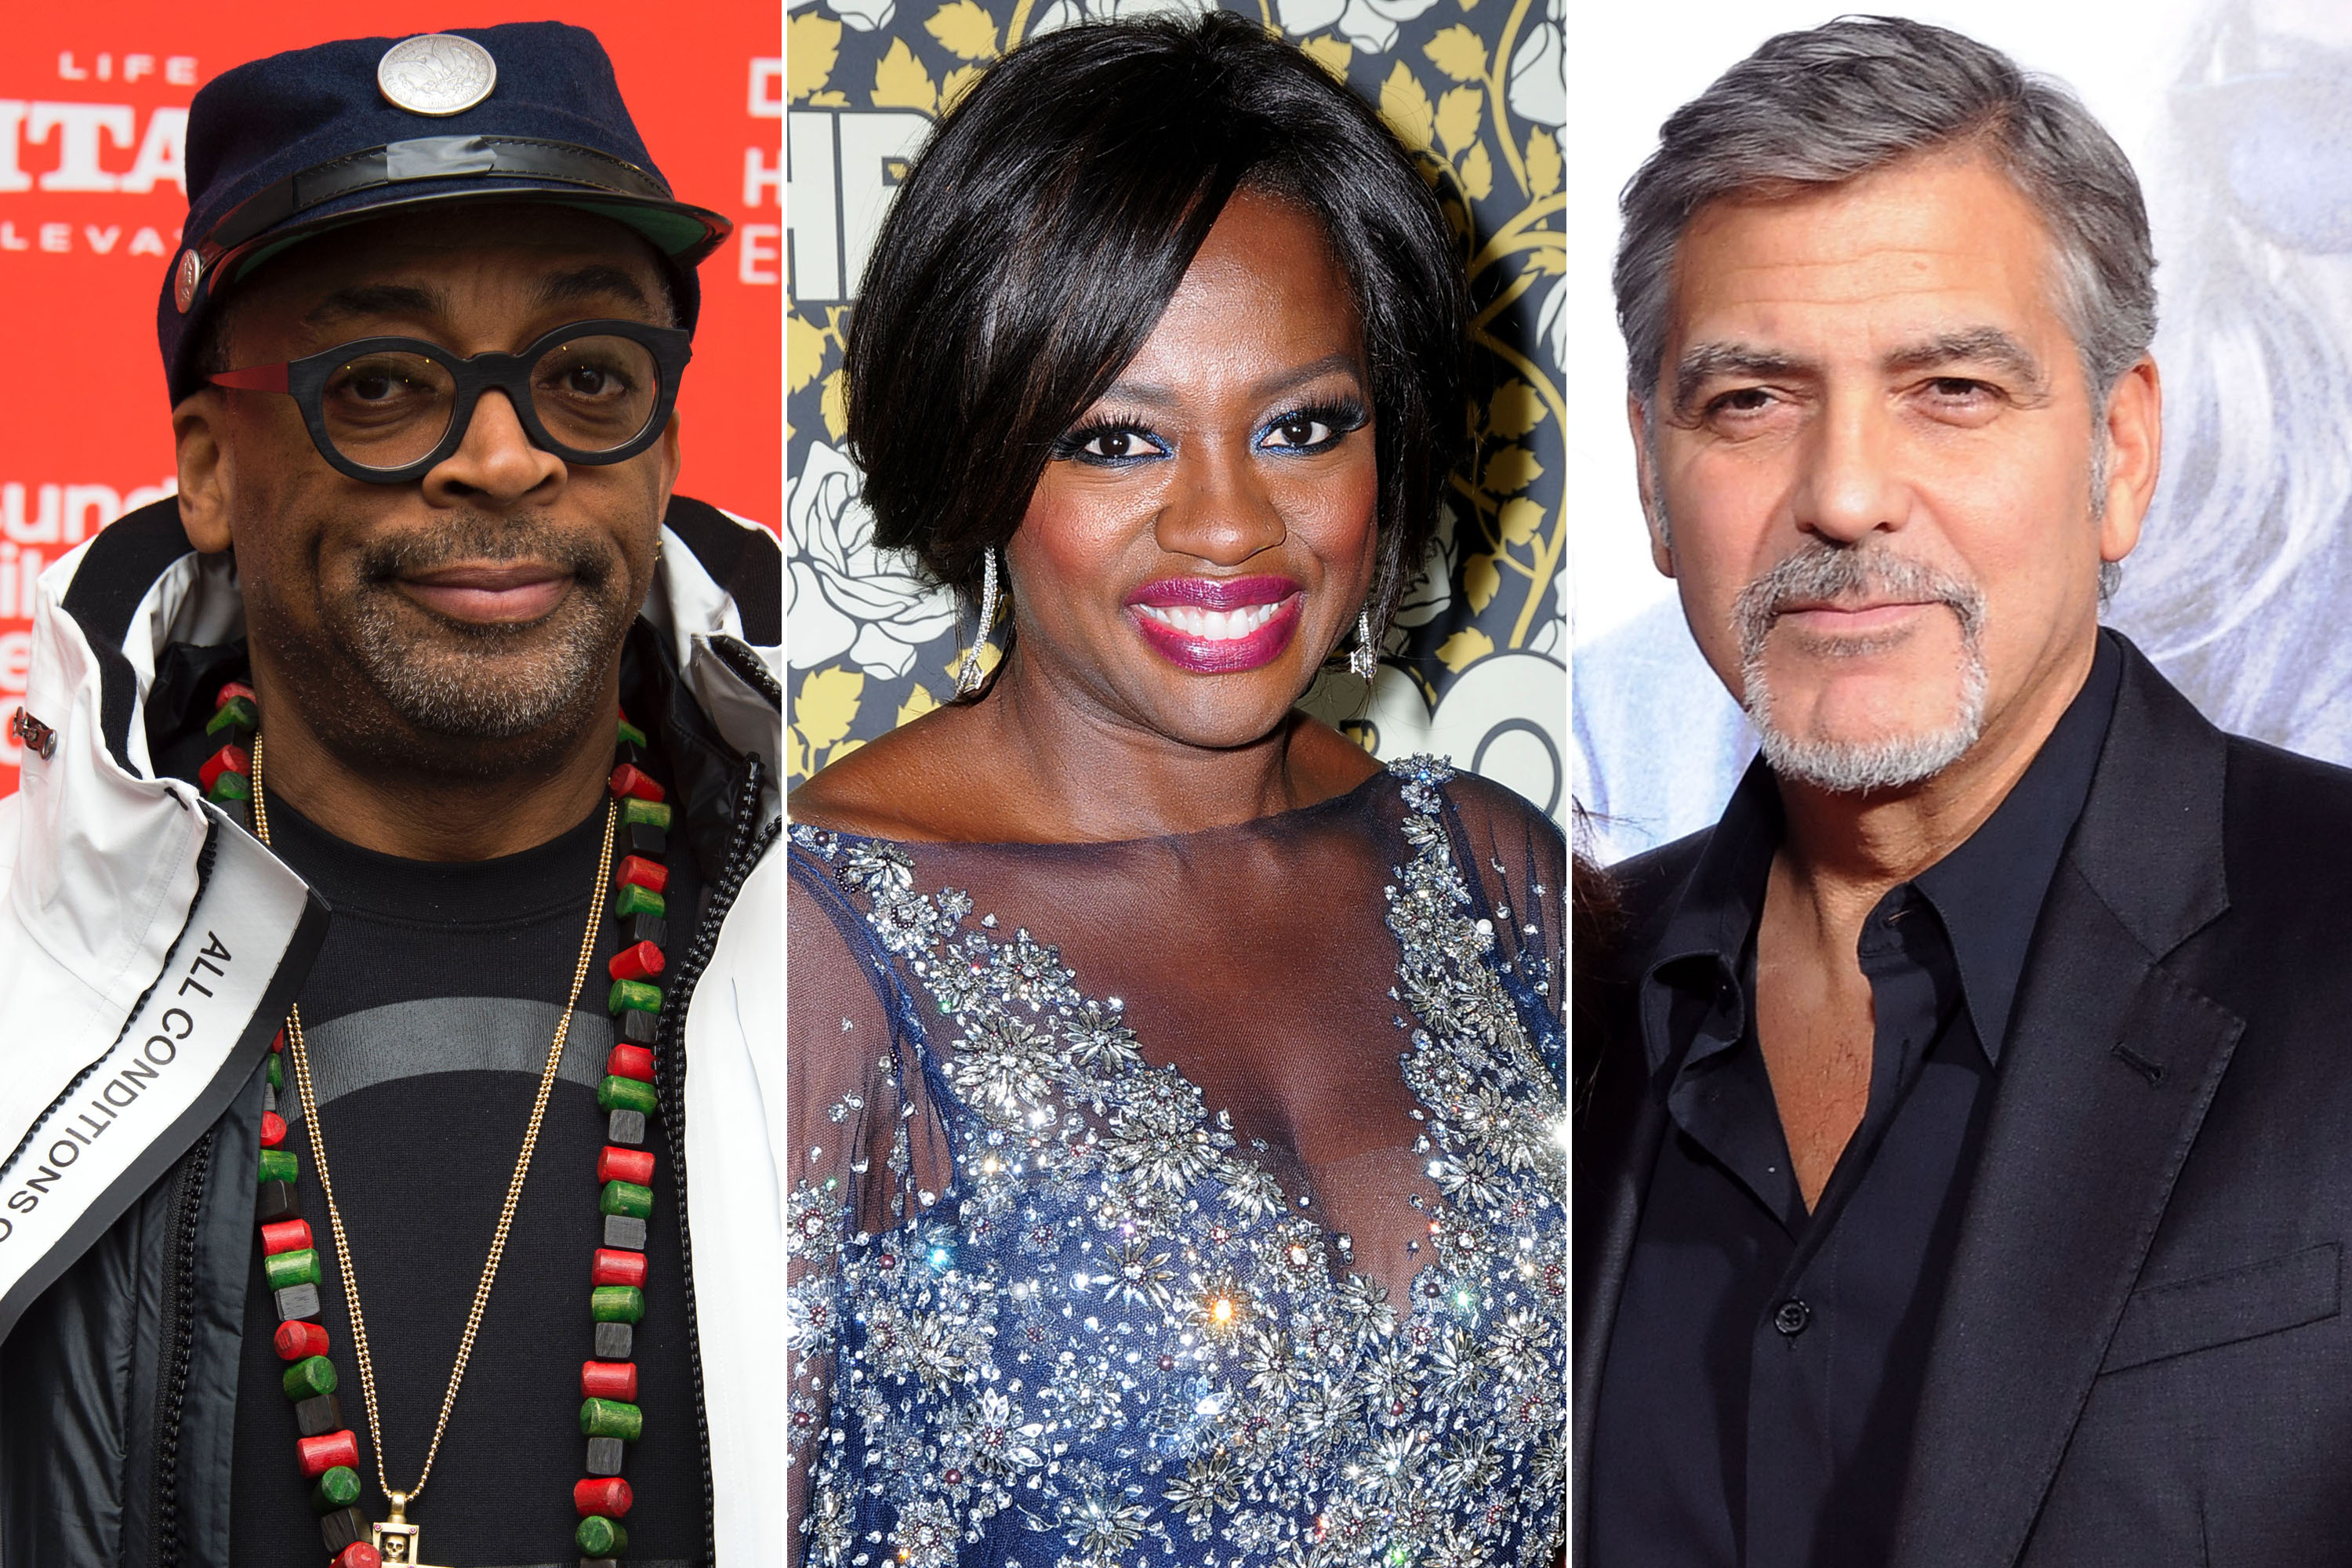 From left to right; director Spike Lee, actress Viola Davis and actor and producer George Clooney. (Valeie Macon—AFP/Getty Images; Barry King—Getty Images (2))